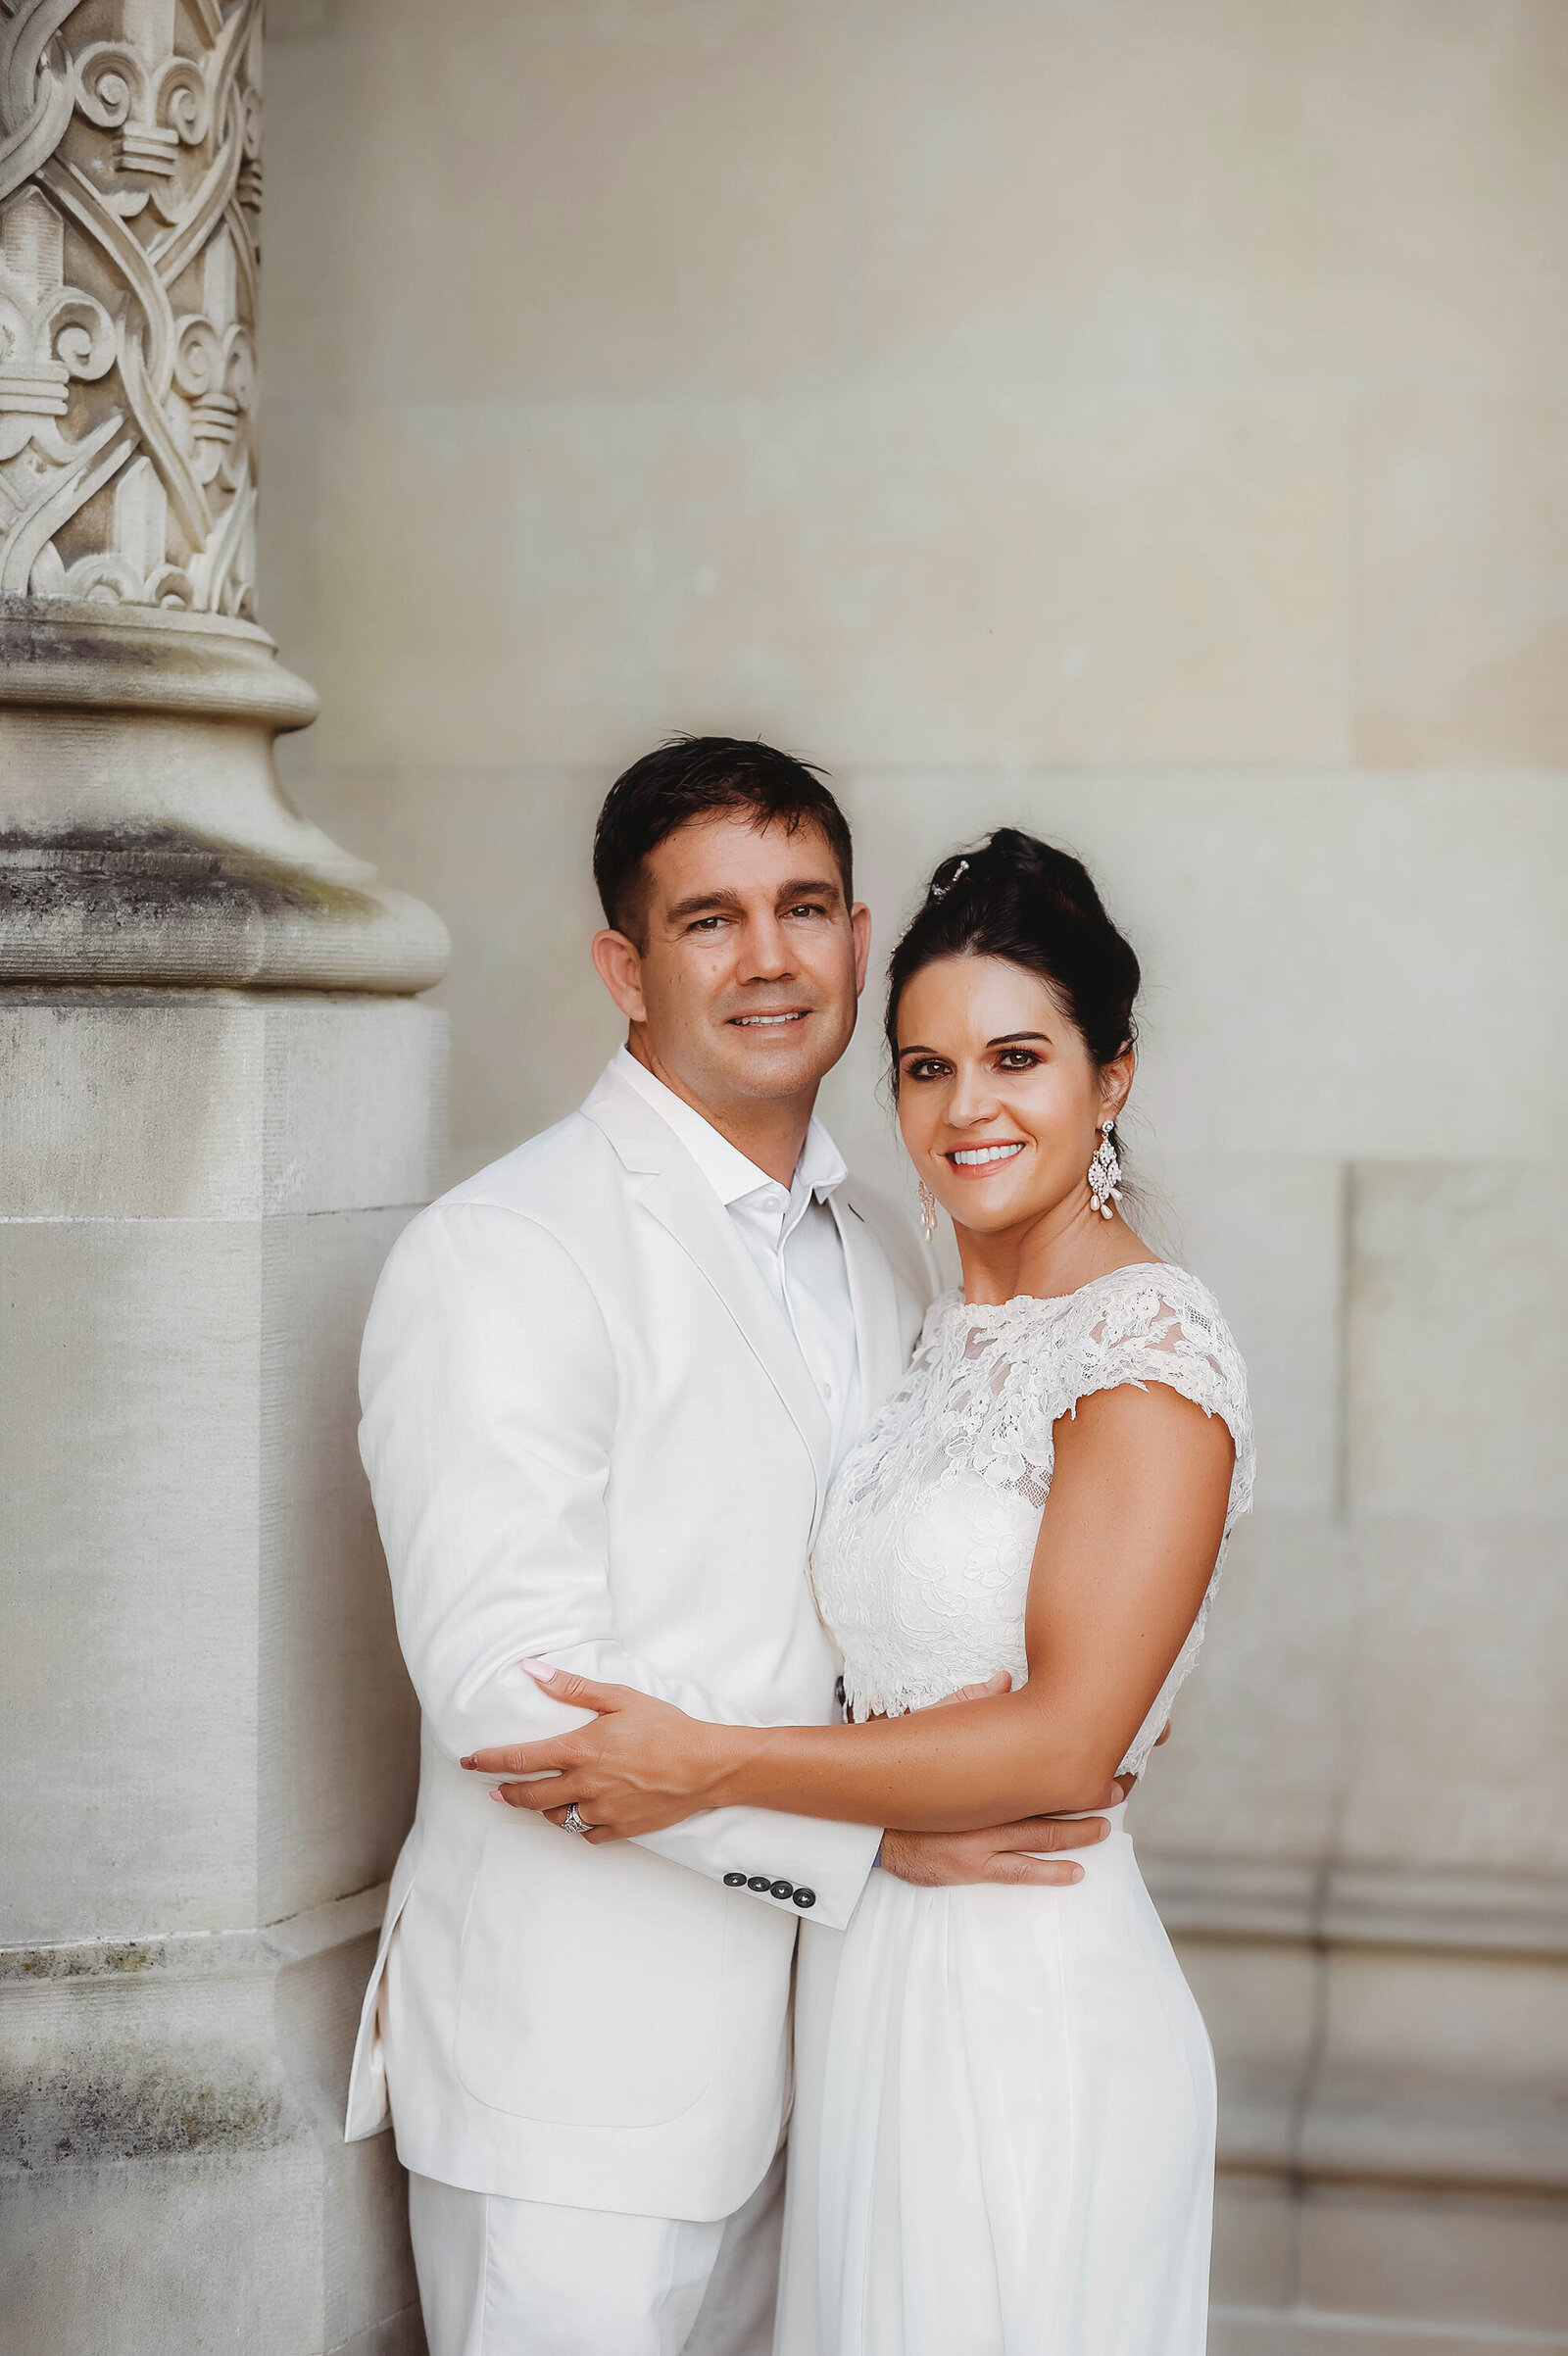 Newlyweds pose for Portraits after Elopement at Biltmore Estate in Asheville, NC.